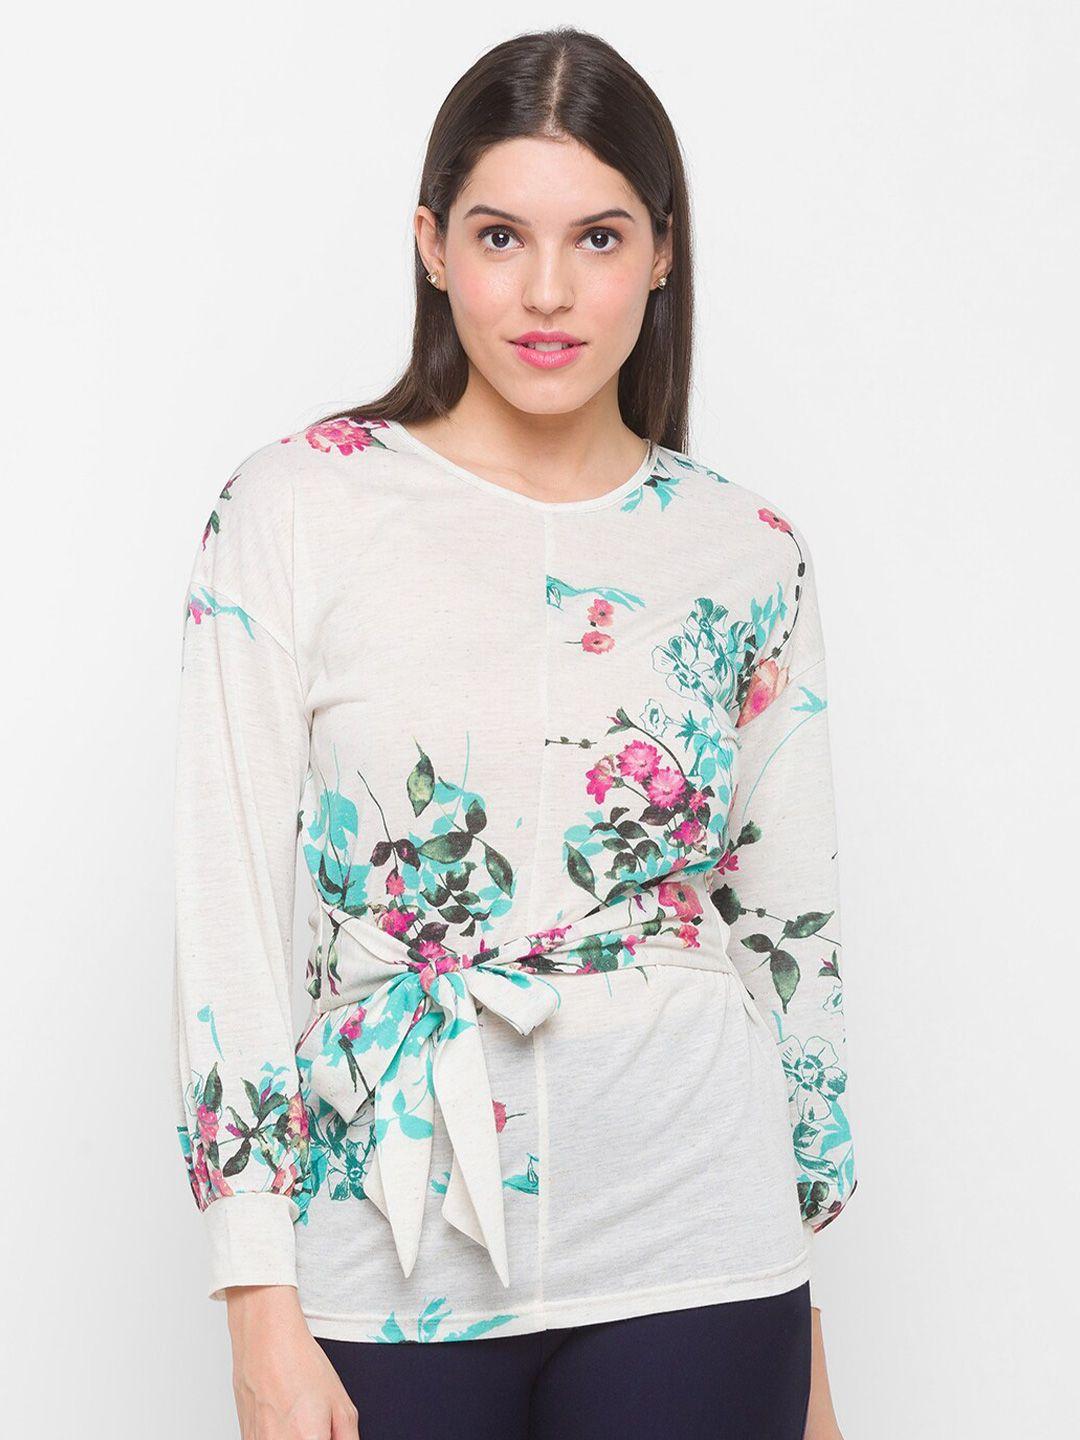 globus off-white & green floral print top